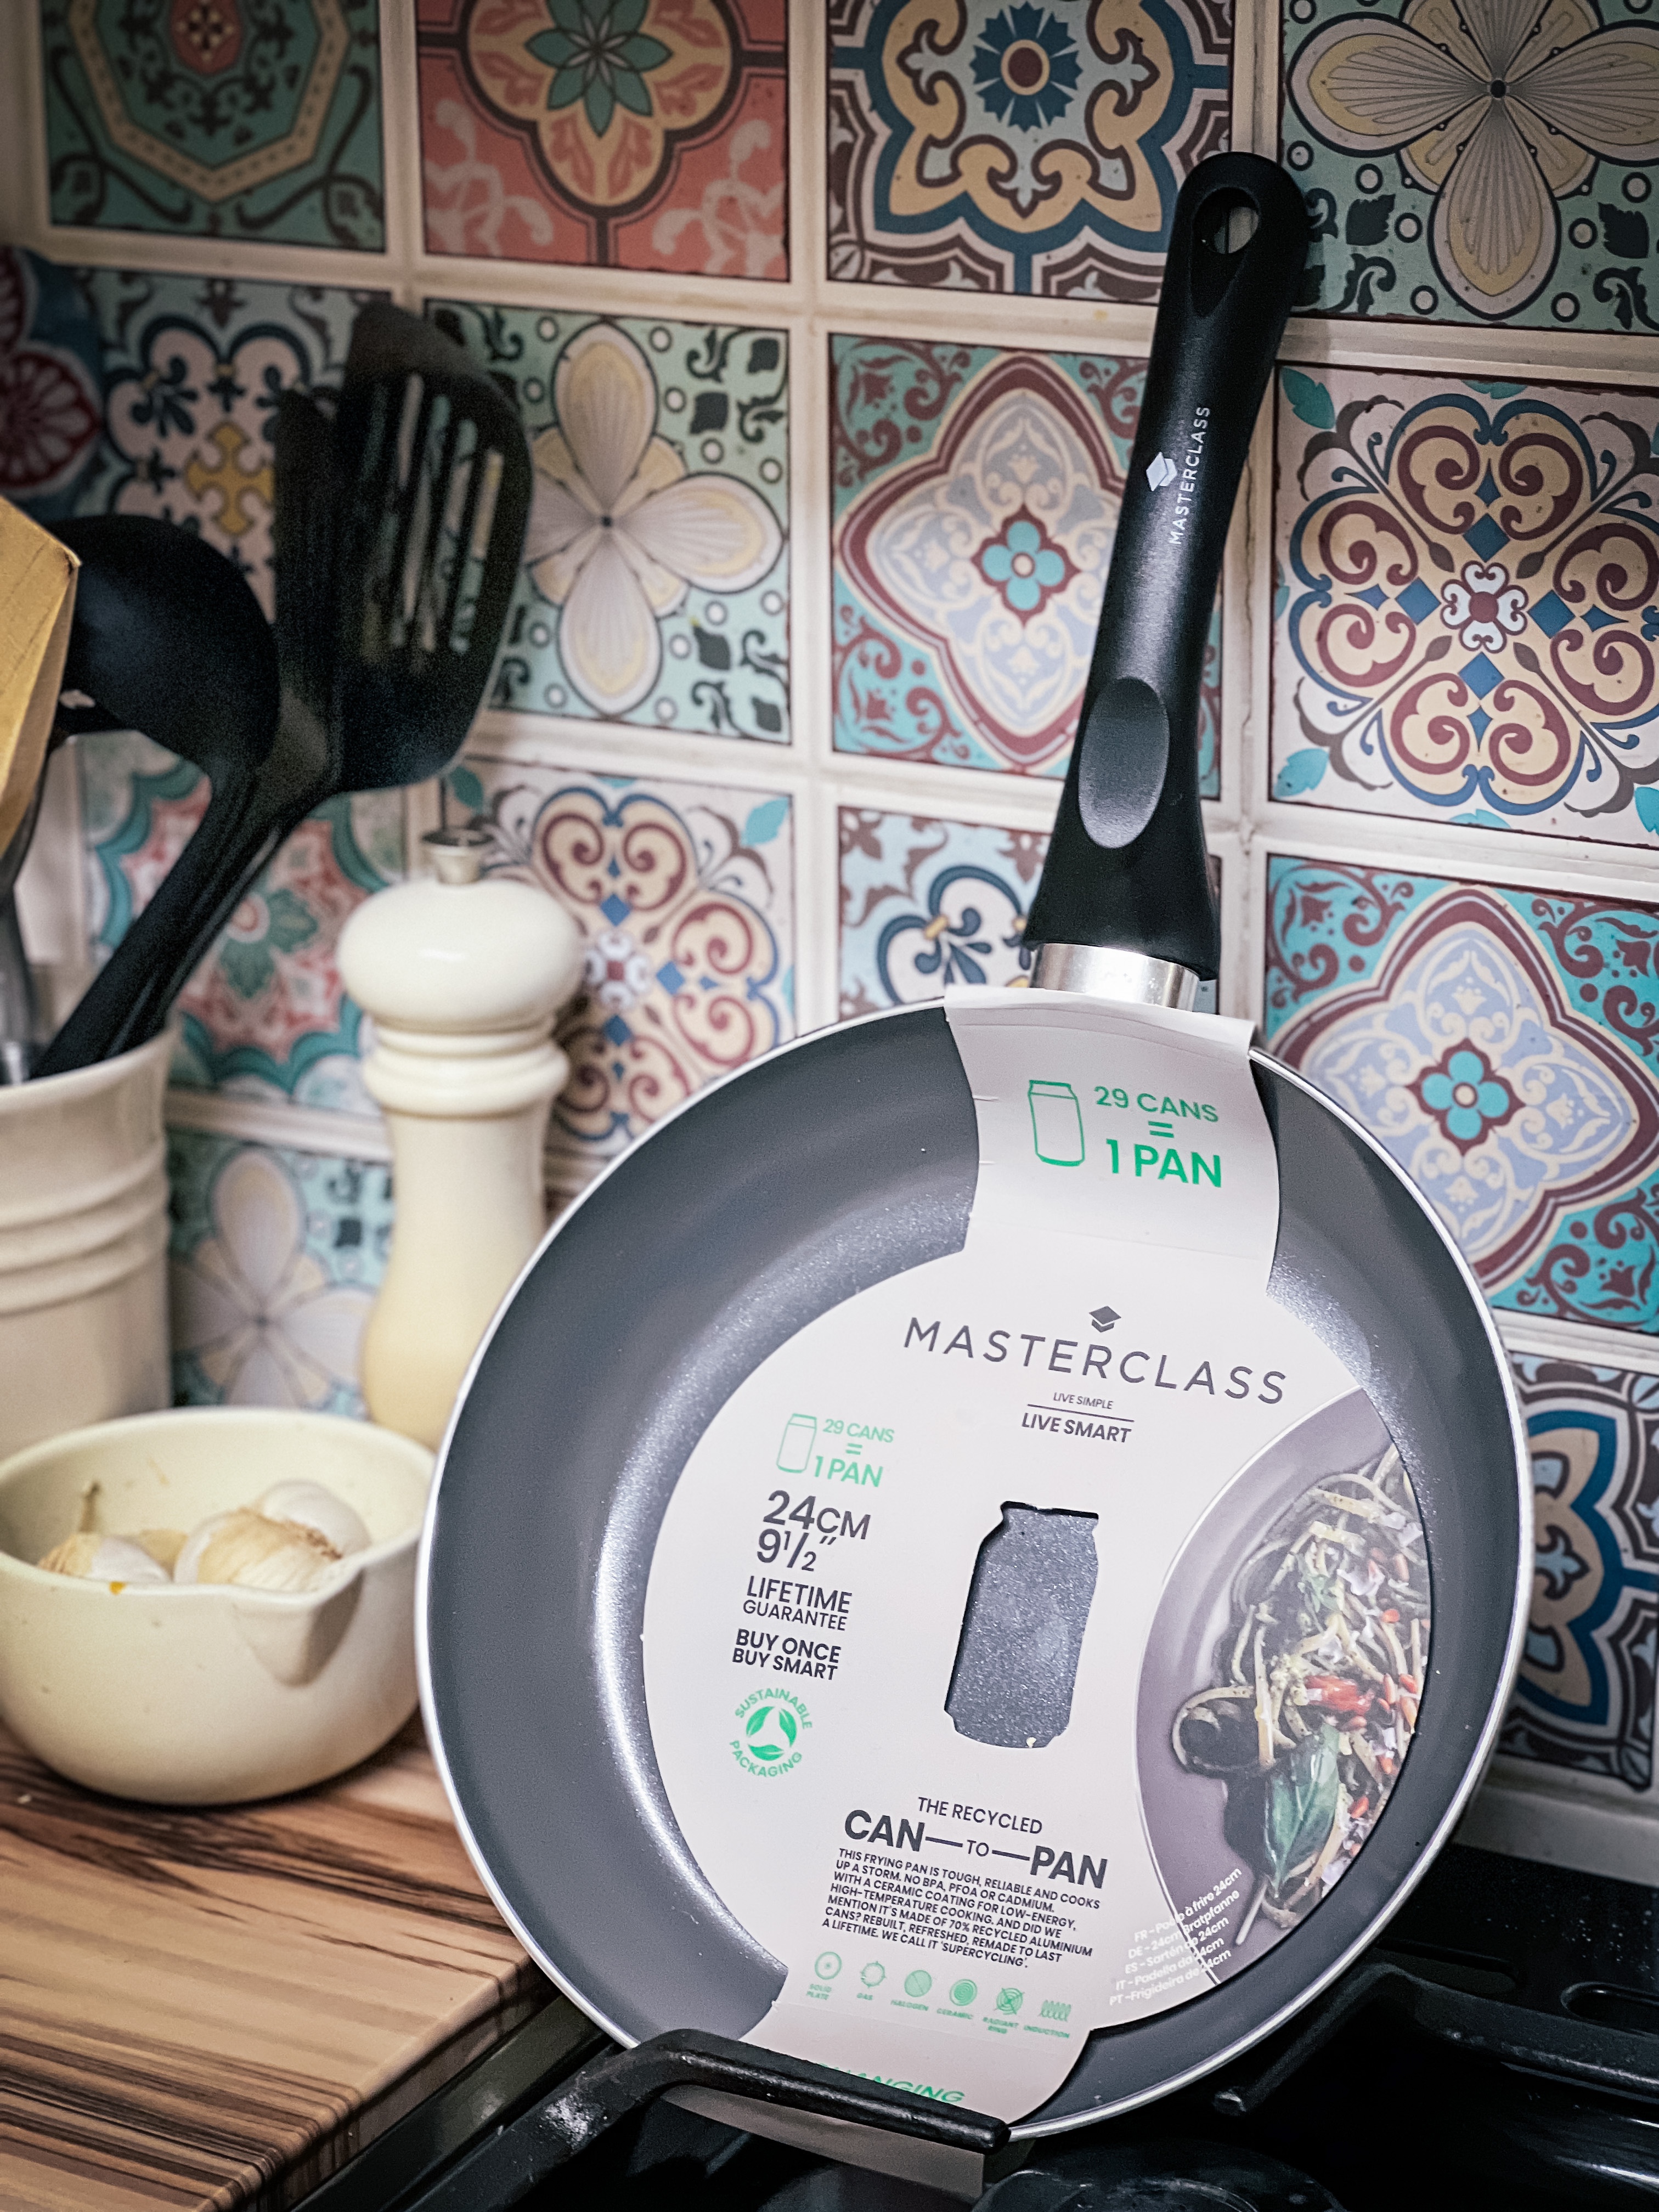 Master class - from can to pan 24cm frying pan review